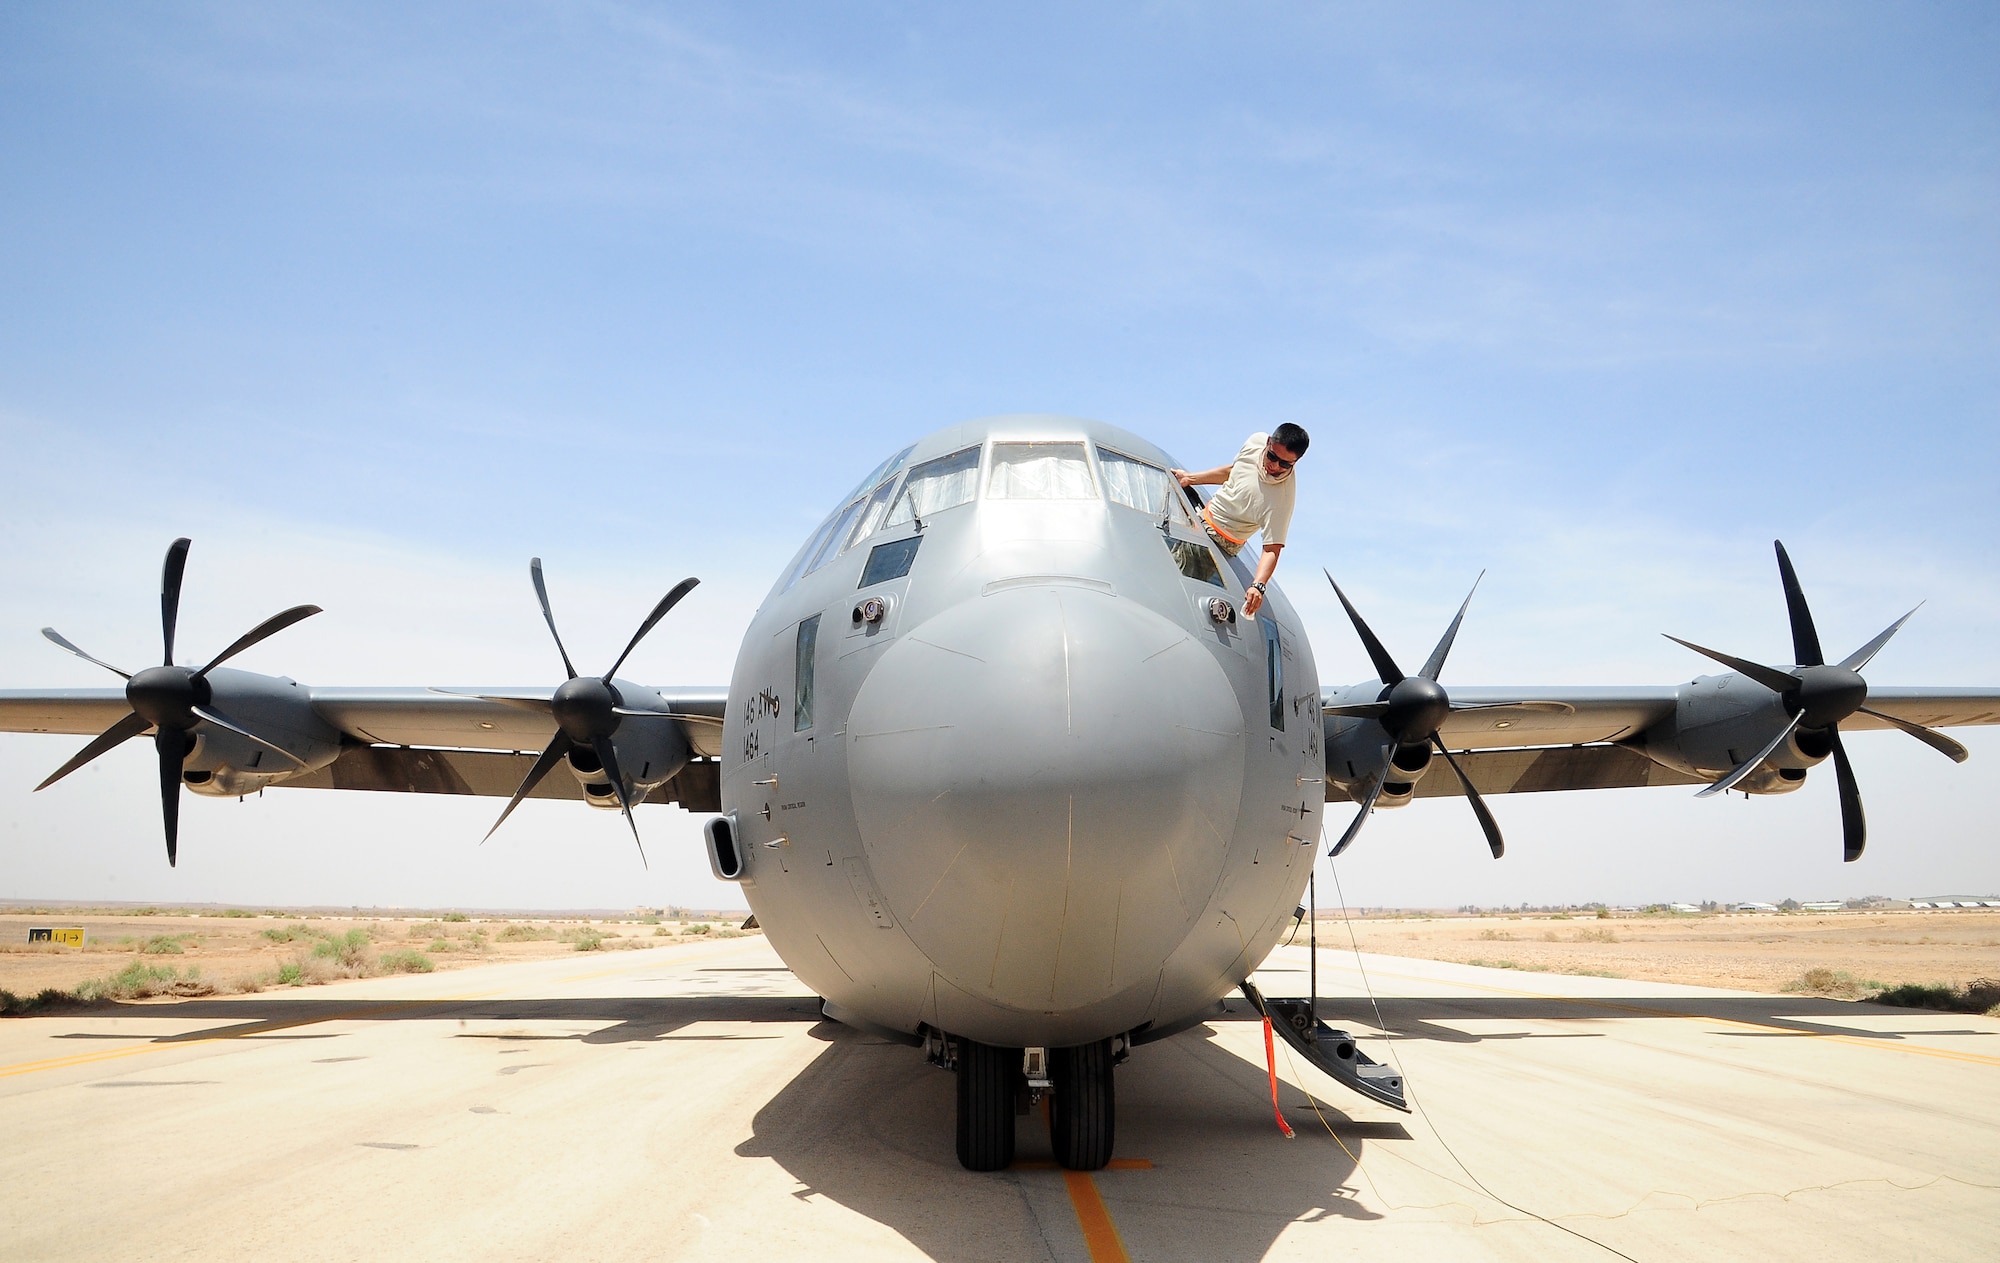 U.S. Air Force Staff Sgt. Juan Olmedo, an integrated avionics specialist with the 146th Aircraft Maintenance Squadron at Channel Islands Air National Guard Station, Calif., washes the windows of a C-130J Hercules during Exercise Eager Lion May 29, 2014, at an air base in northern Jordan. Both at home station and in deployed locations, C-130s are often called upon to respond to crises and to provide humanitarian assistance. (U.S. Air Force photo by Staff Sgt. Brigitte N. Brantley/Released)